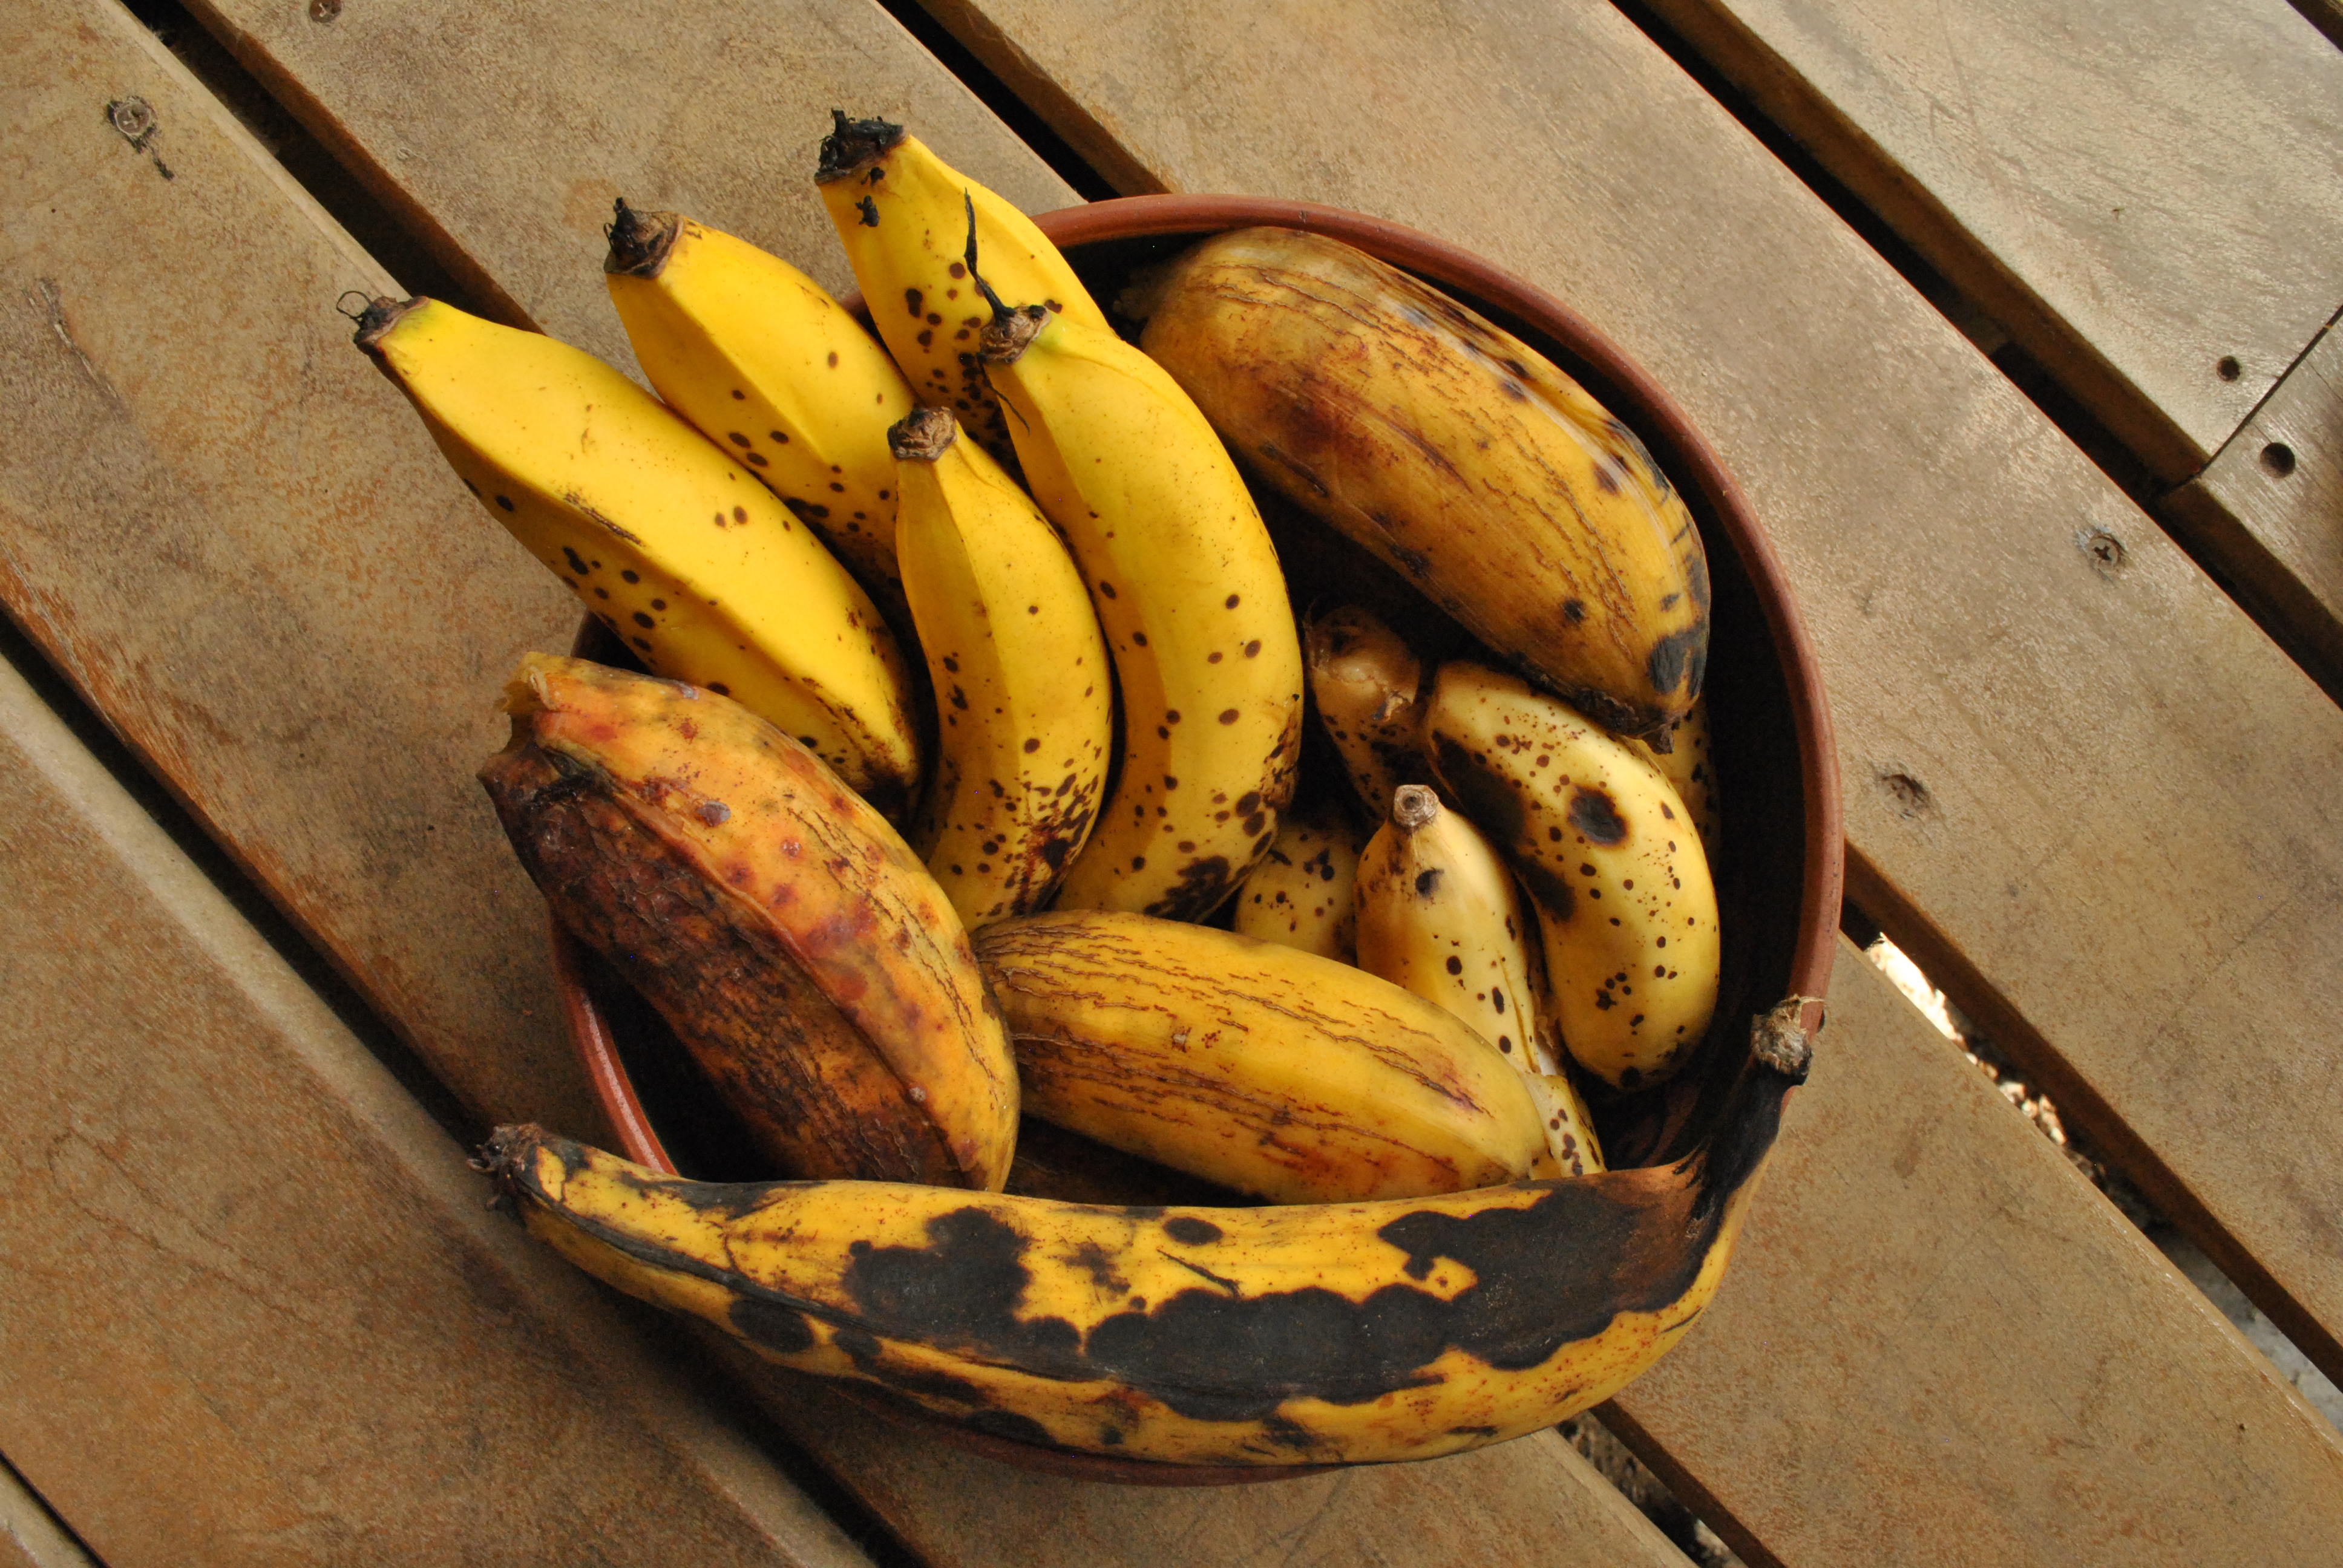 The Little Banana Book - A Practical Guide To Buying, Storing, Ripening